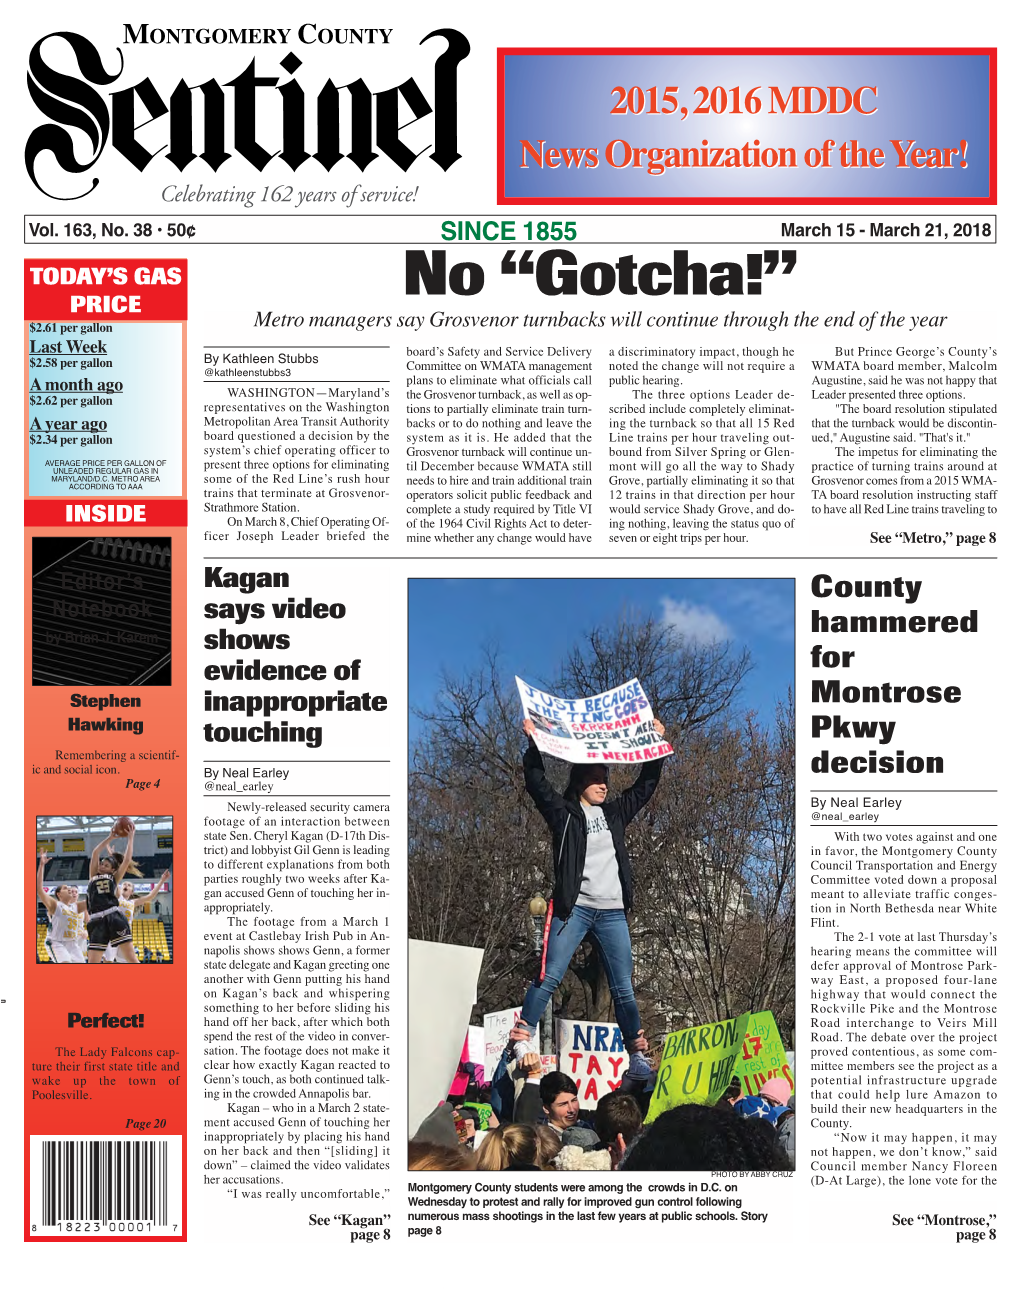 THE MONTGOMERY COUNTY SENTINEL MARCH 15, 2018 EFLECTIONS the Montgomery County Sentinel, Published Weekly by Berlyn Inc